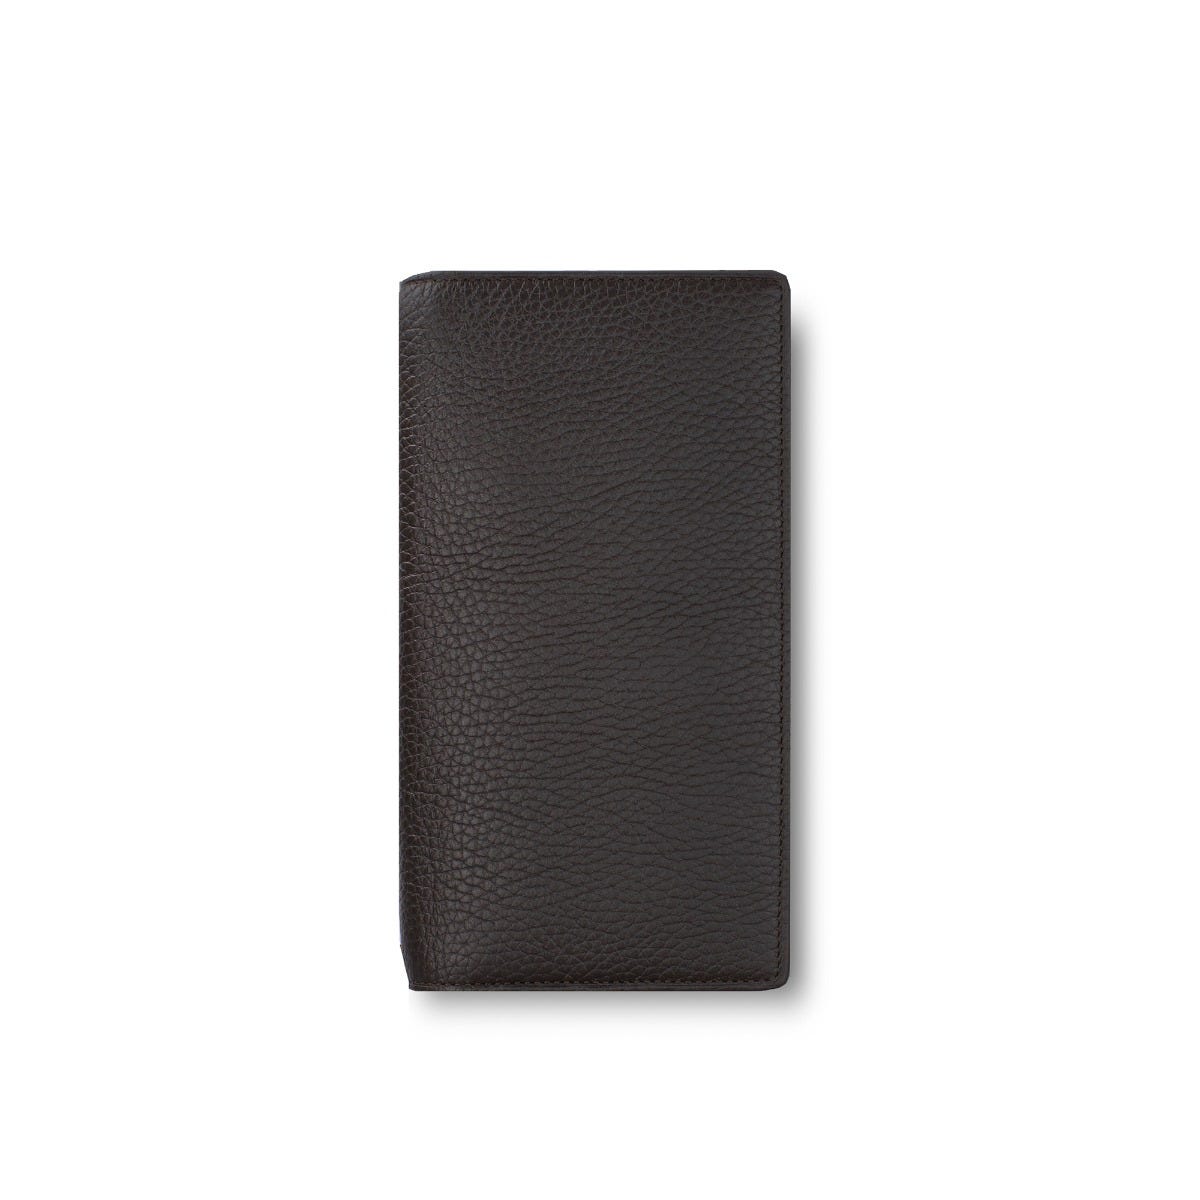 GMT 12cc Coat Wallet in Soft Grain Leather